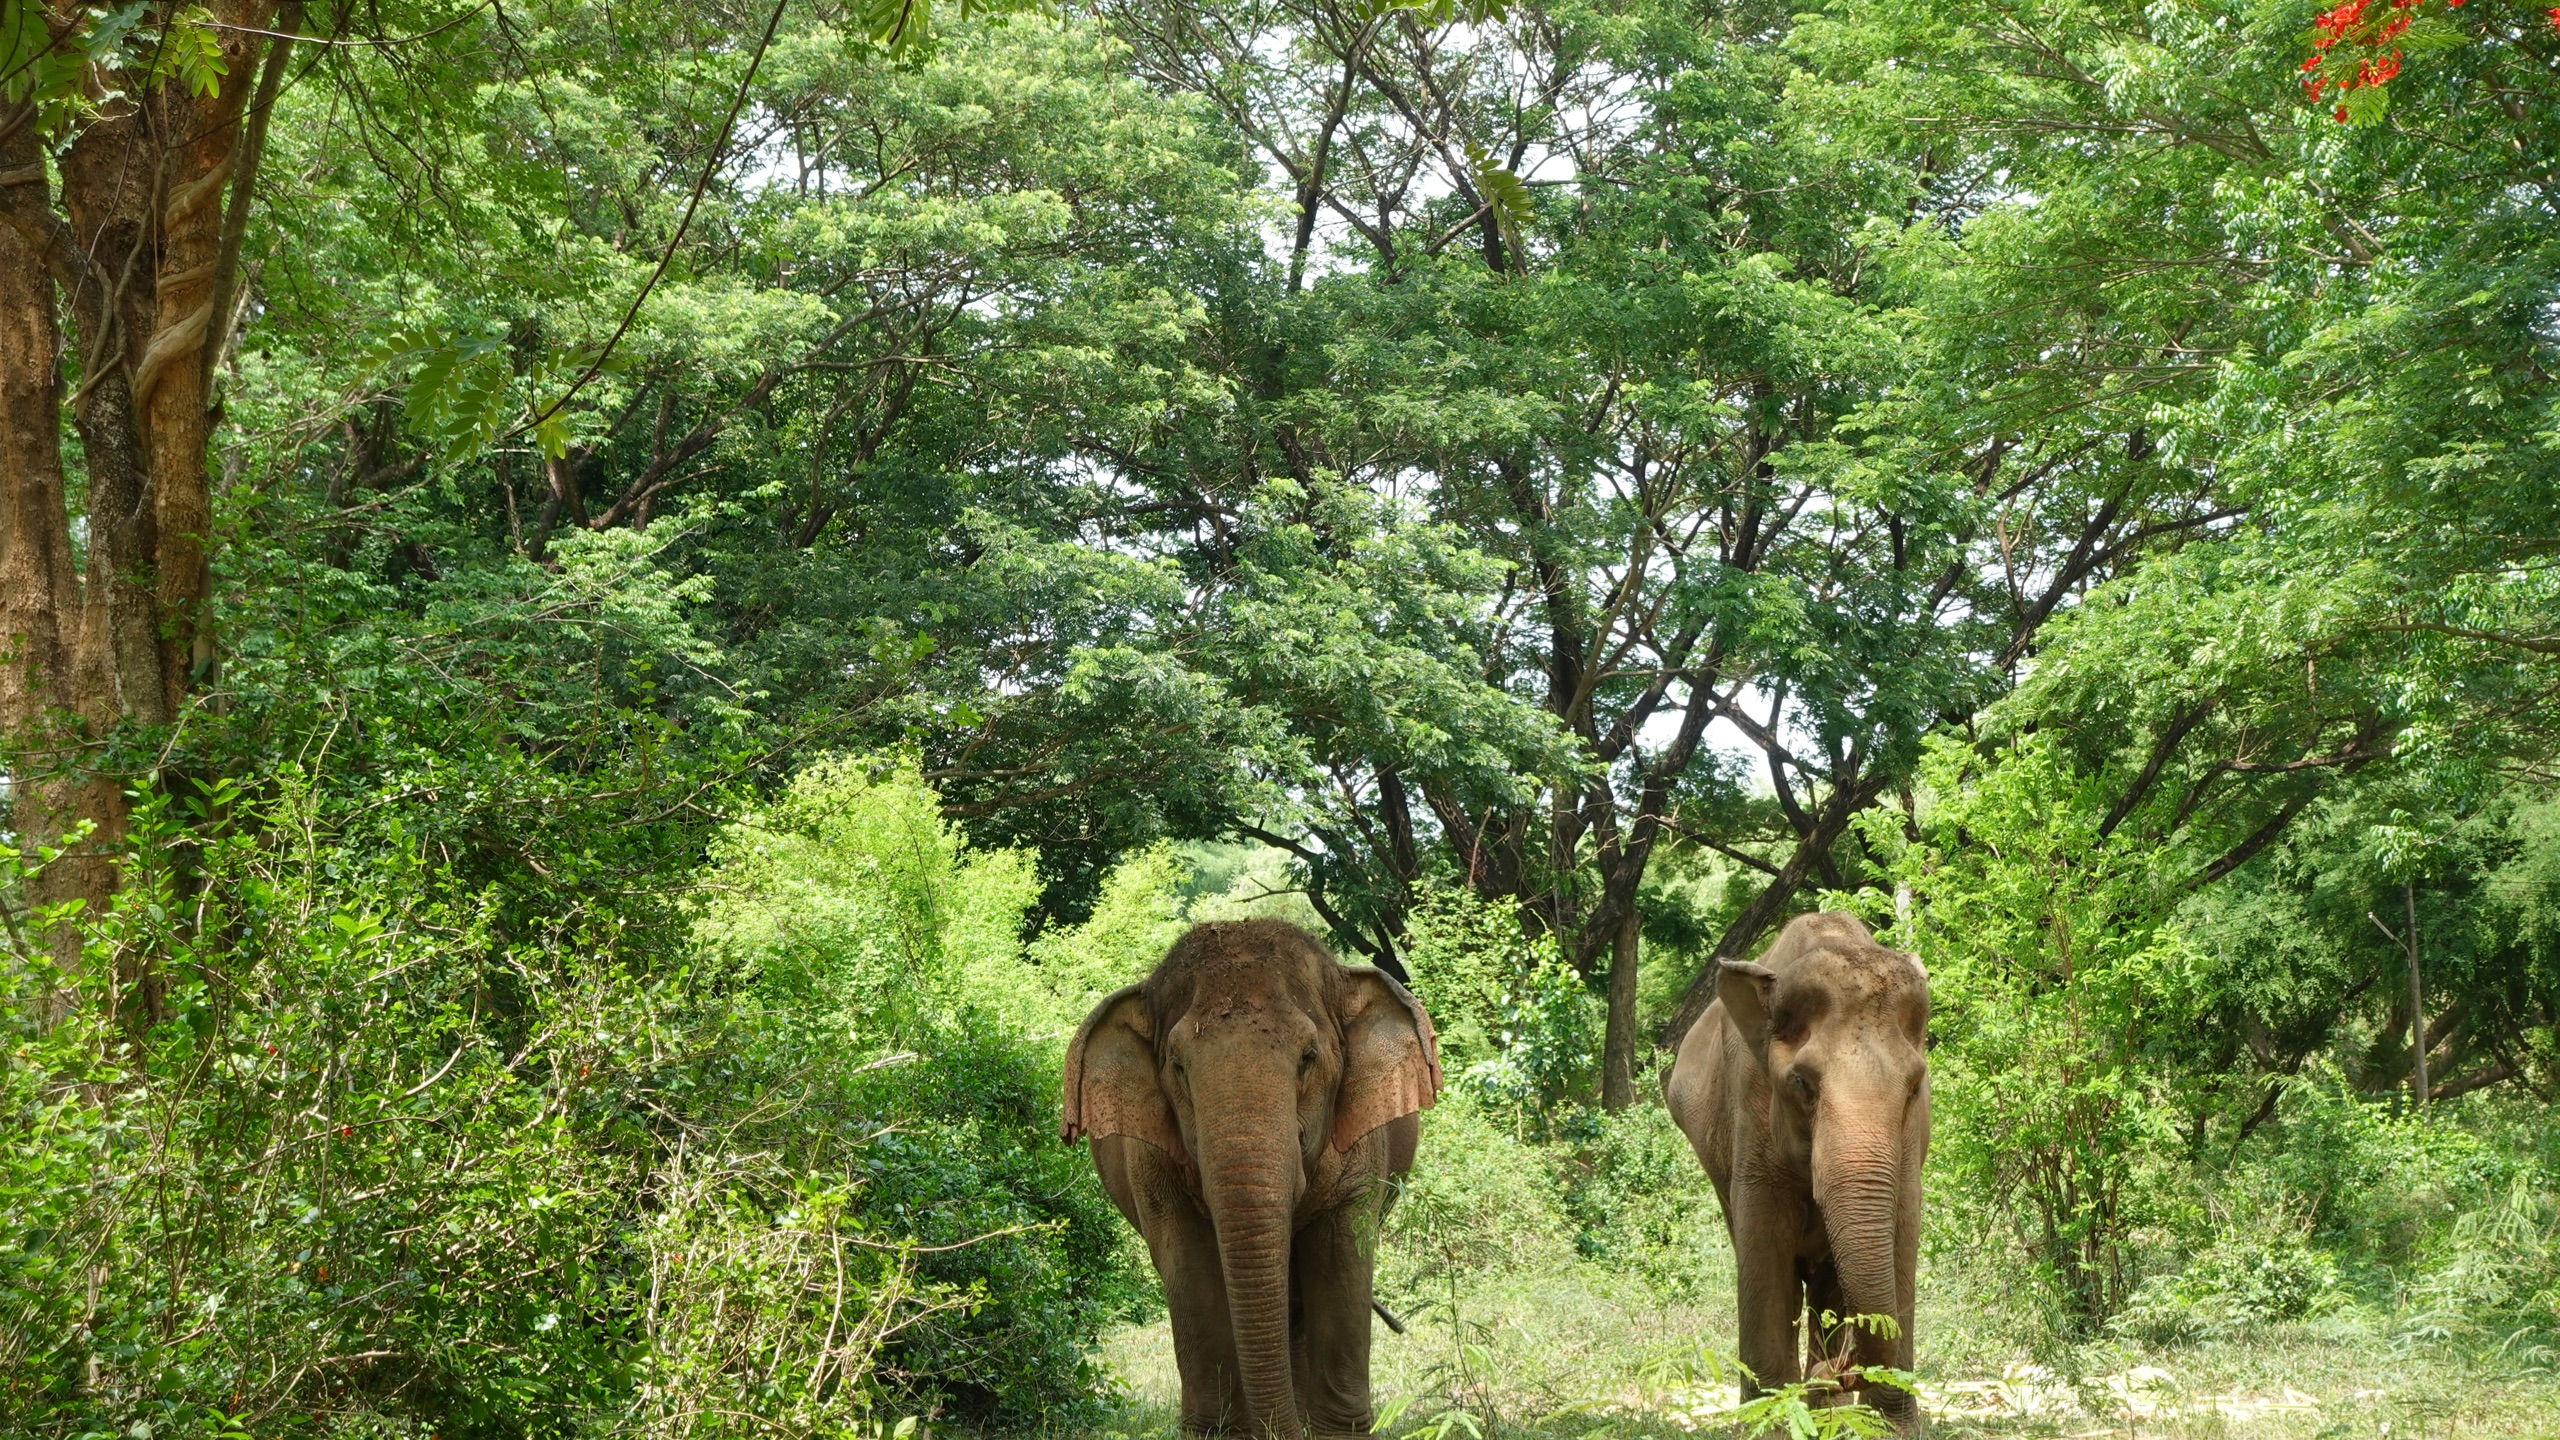 Nature's Giants: An Ethical Day of Discovery with Elephants